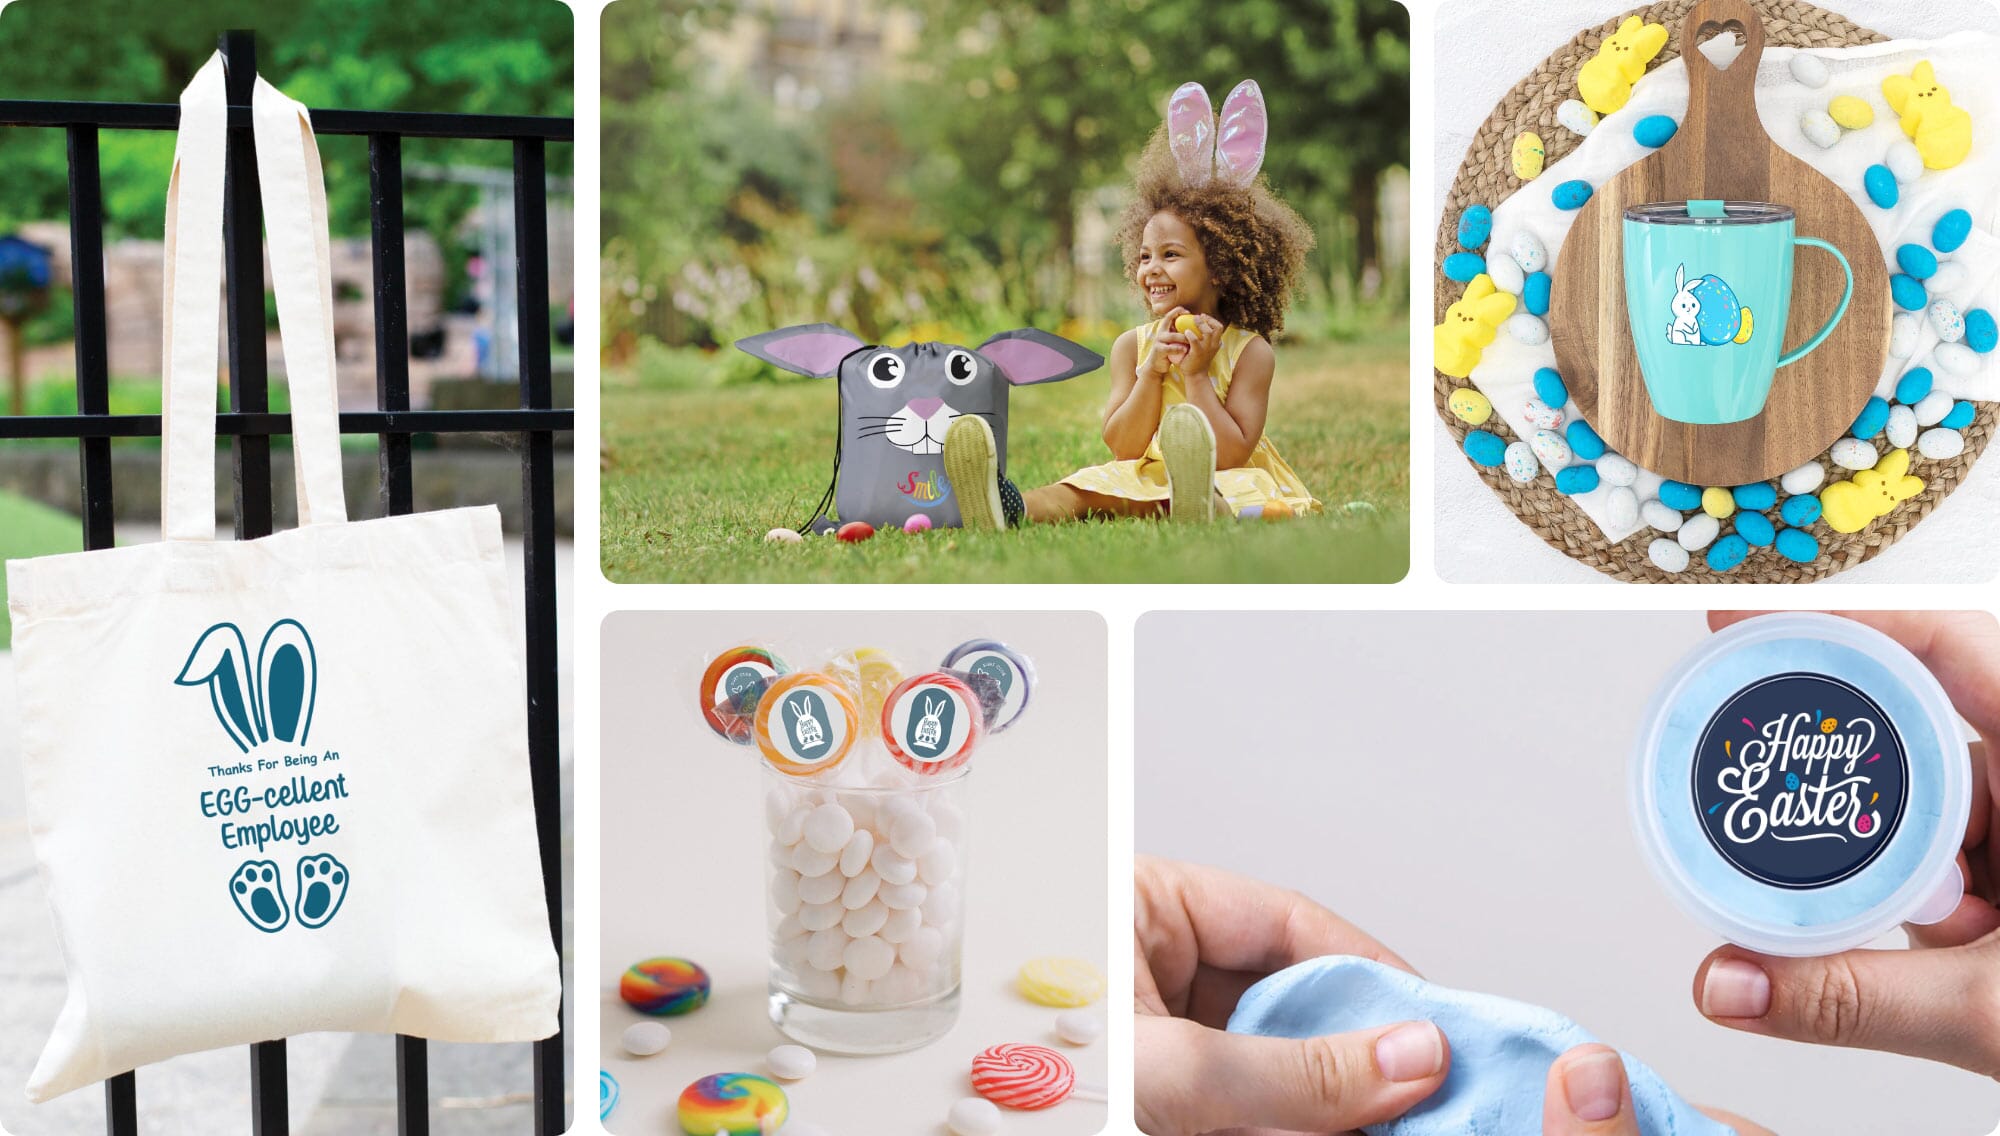 Easter Ideas for Work: Office Giveaway Ideas, Employee Appreciation Gifts, Games & Prizes